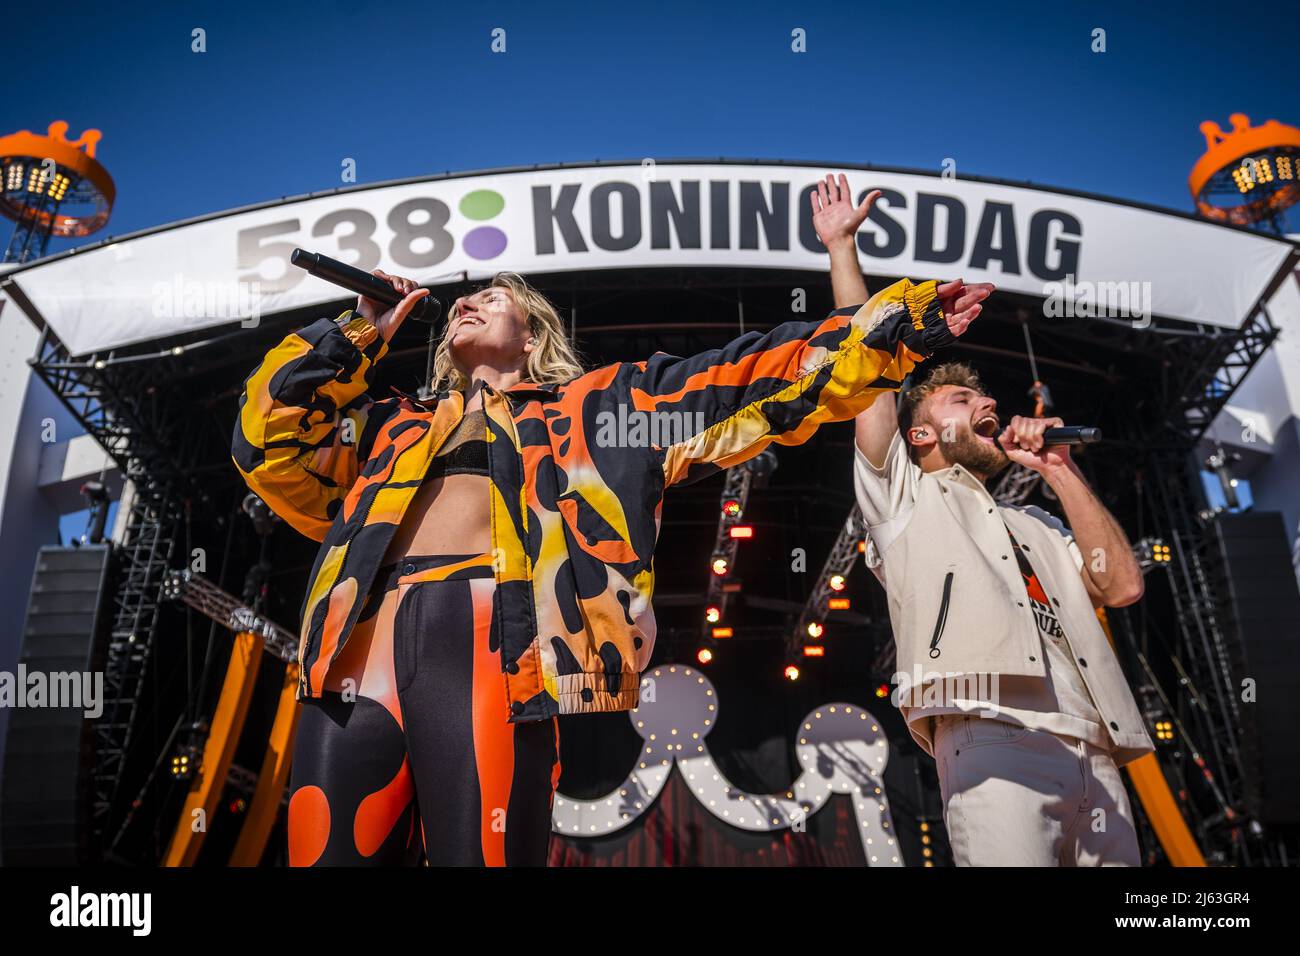 2022-04-27 17:34:29 BREDA - Suzan & Freek perform during the King's Day  party of Radio 538 on the Chasseveld. Due to the corona pandemic, the event  took place digitally for the past